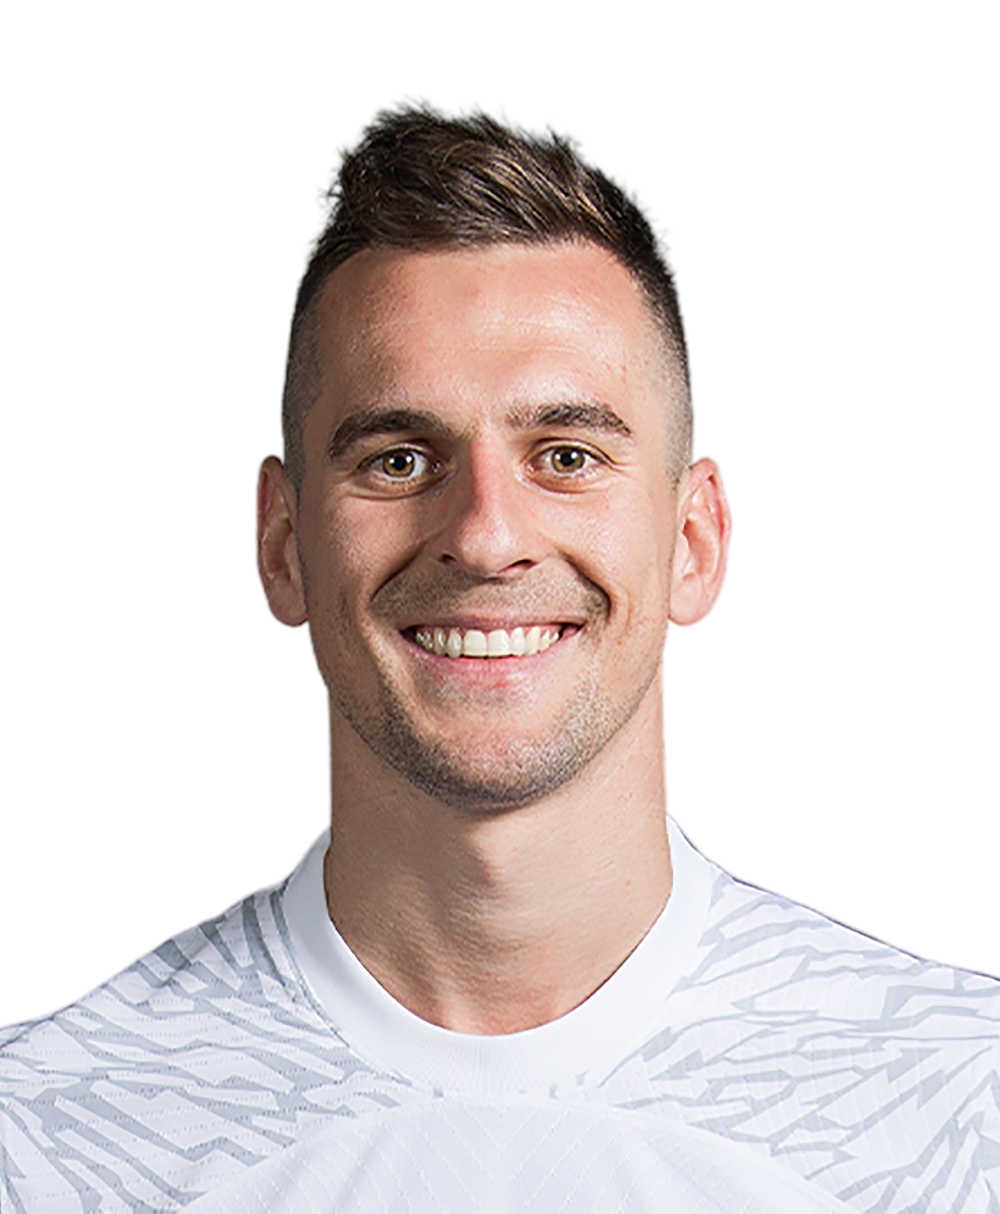 Milik scrambles in Juventus' winner for 1-0 victory over previously  unbeaten Lecce in Serie A